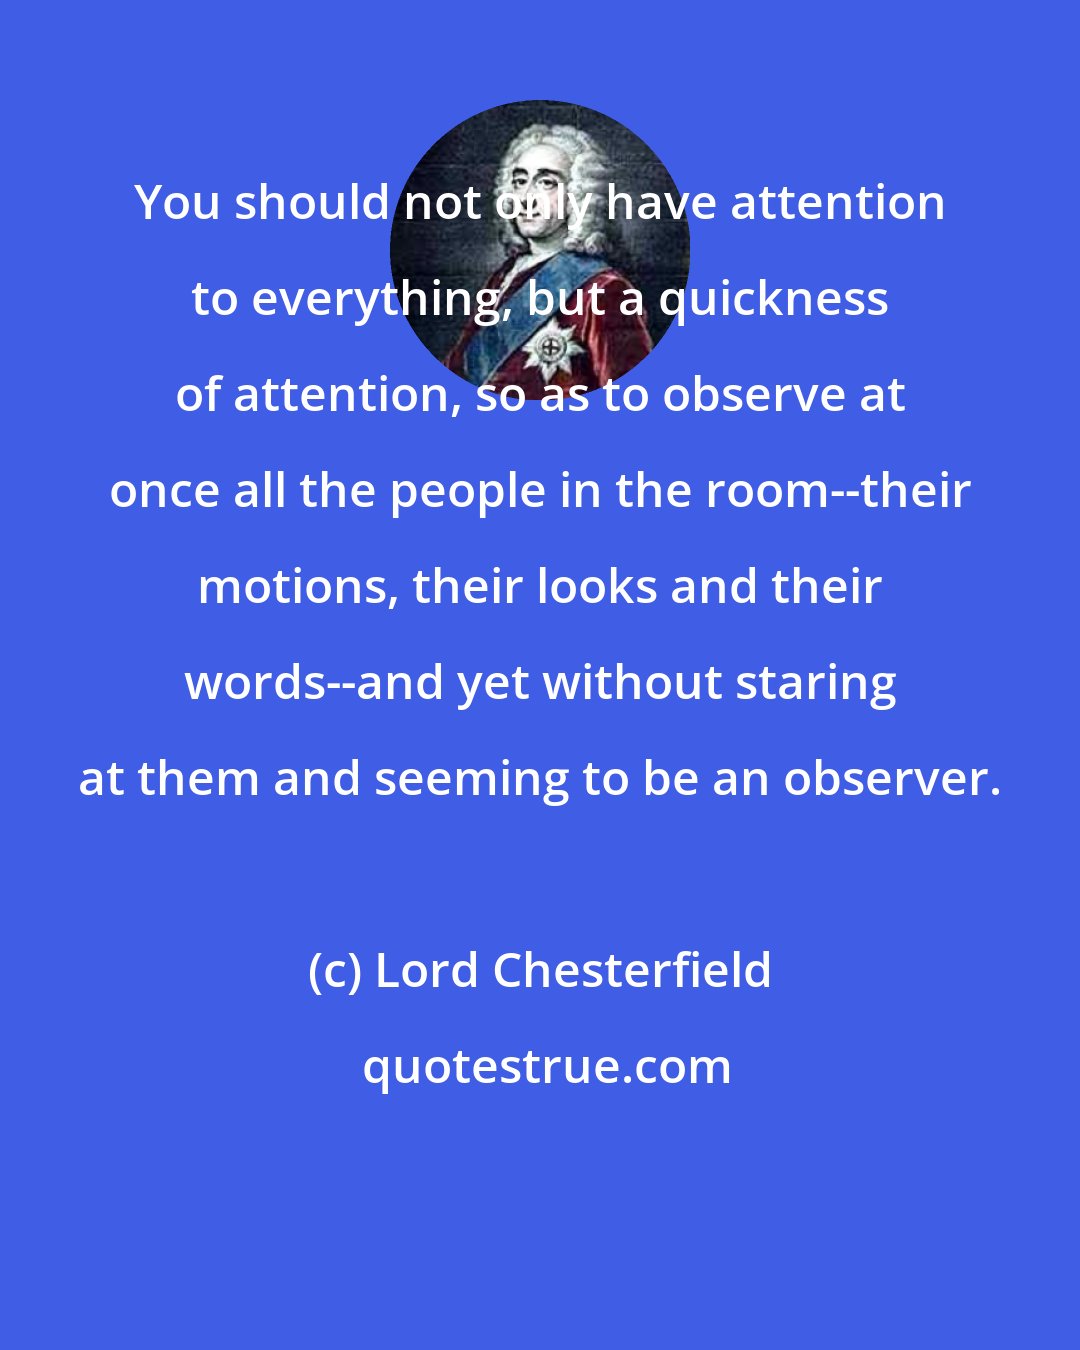 Lord Chesterfield: You should not only have attention to everything, but a quickness of attention, so as to observe at once all the people in the room--their motions, their looks and their words--and yet without staring at them and seeming to be an observer.